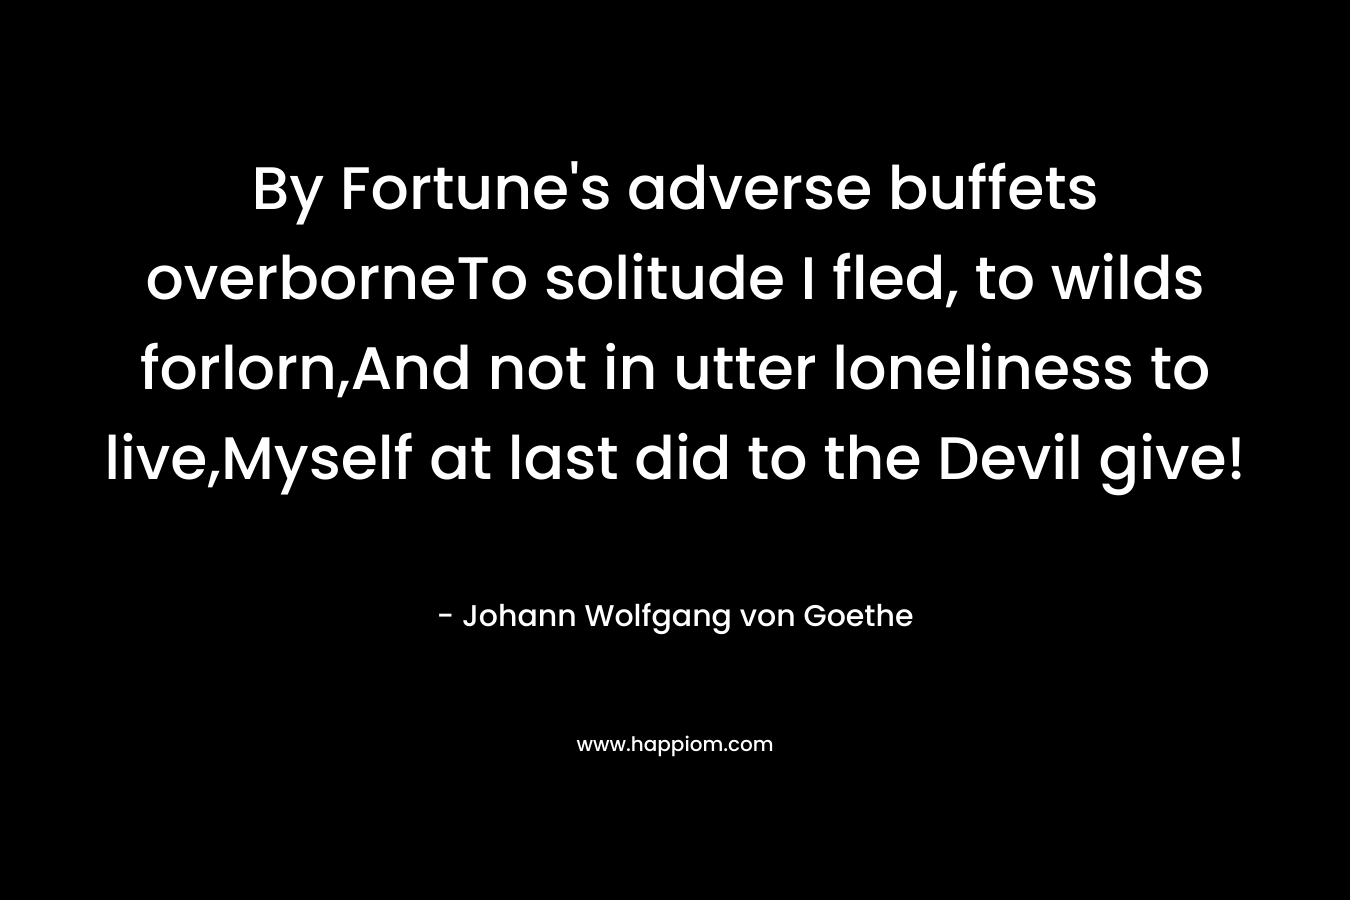 By Fortune's adverse buffets overborneTo solitude I fled, to wilds forlorn,And not in utter loneliness to live,Myself at last did to the Devil give!